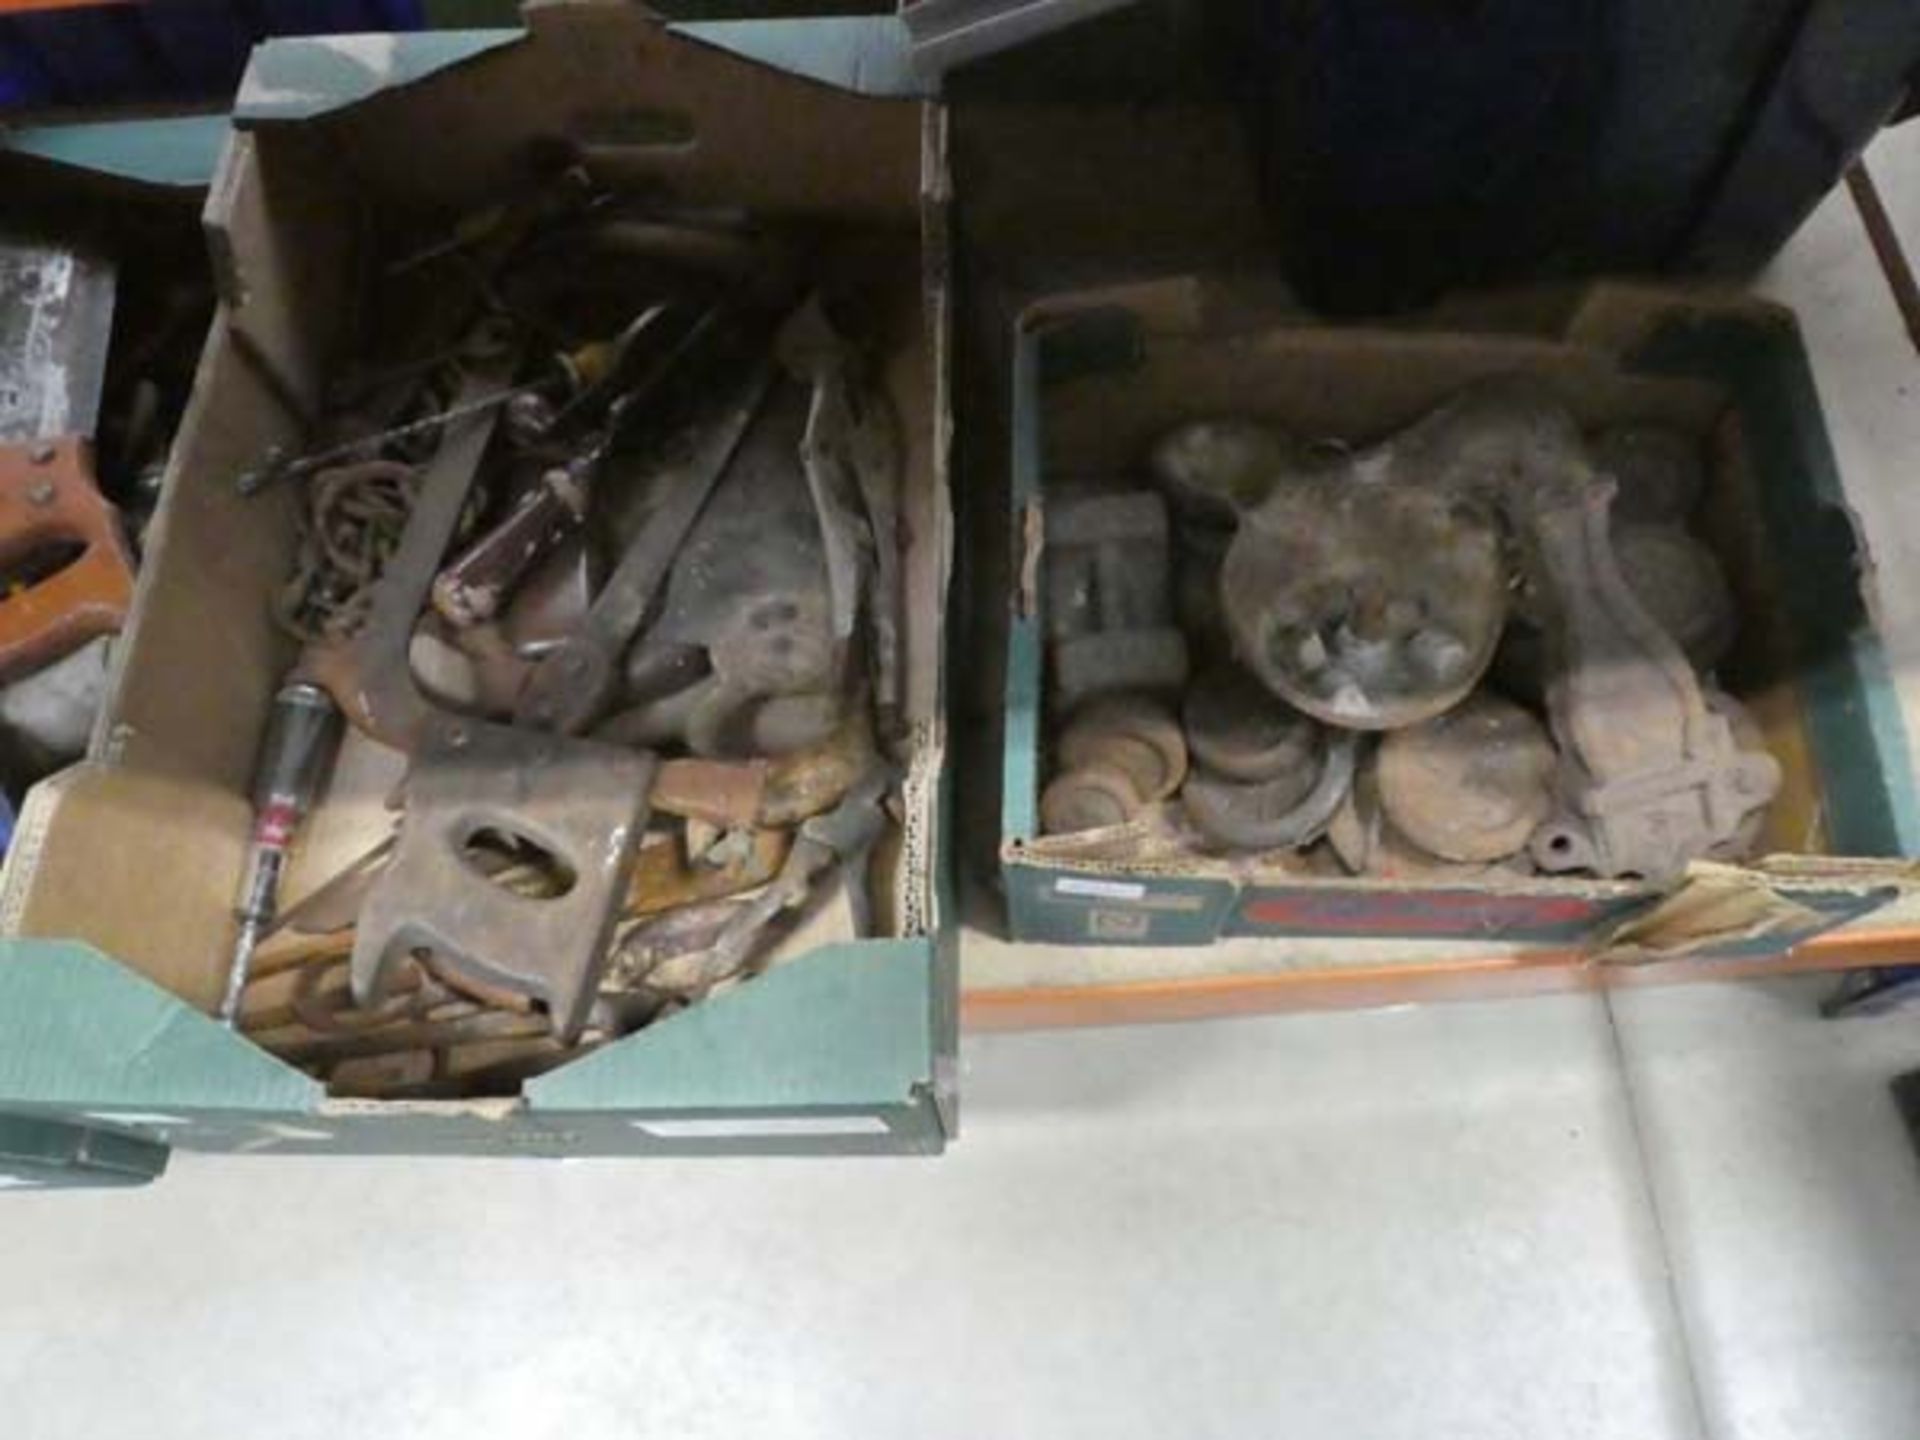 1/2 underbay of weights, vintage tools, saws, vice etc - Image 3 of 3